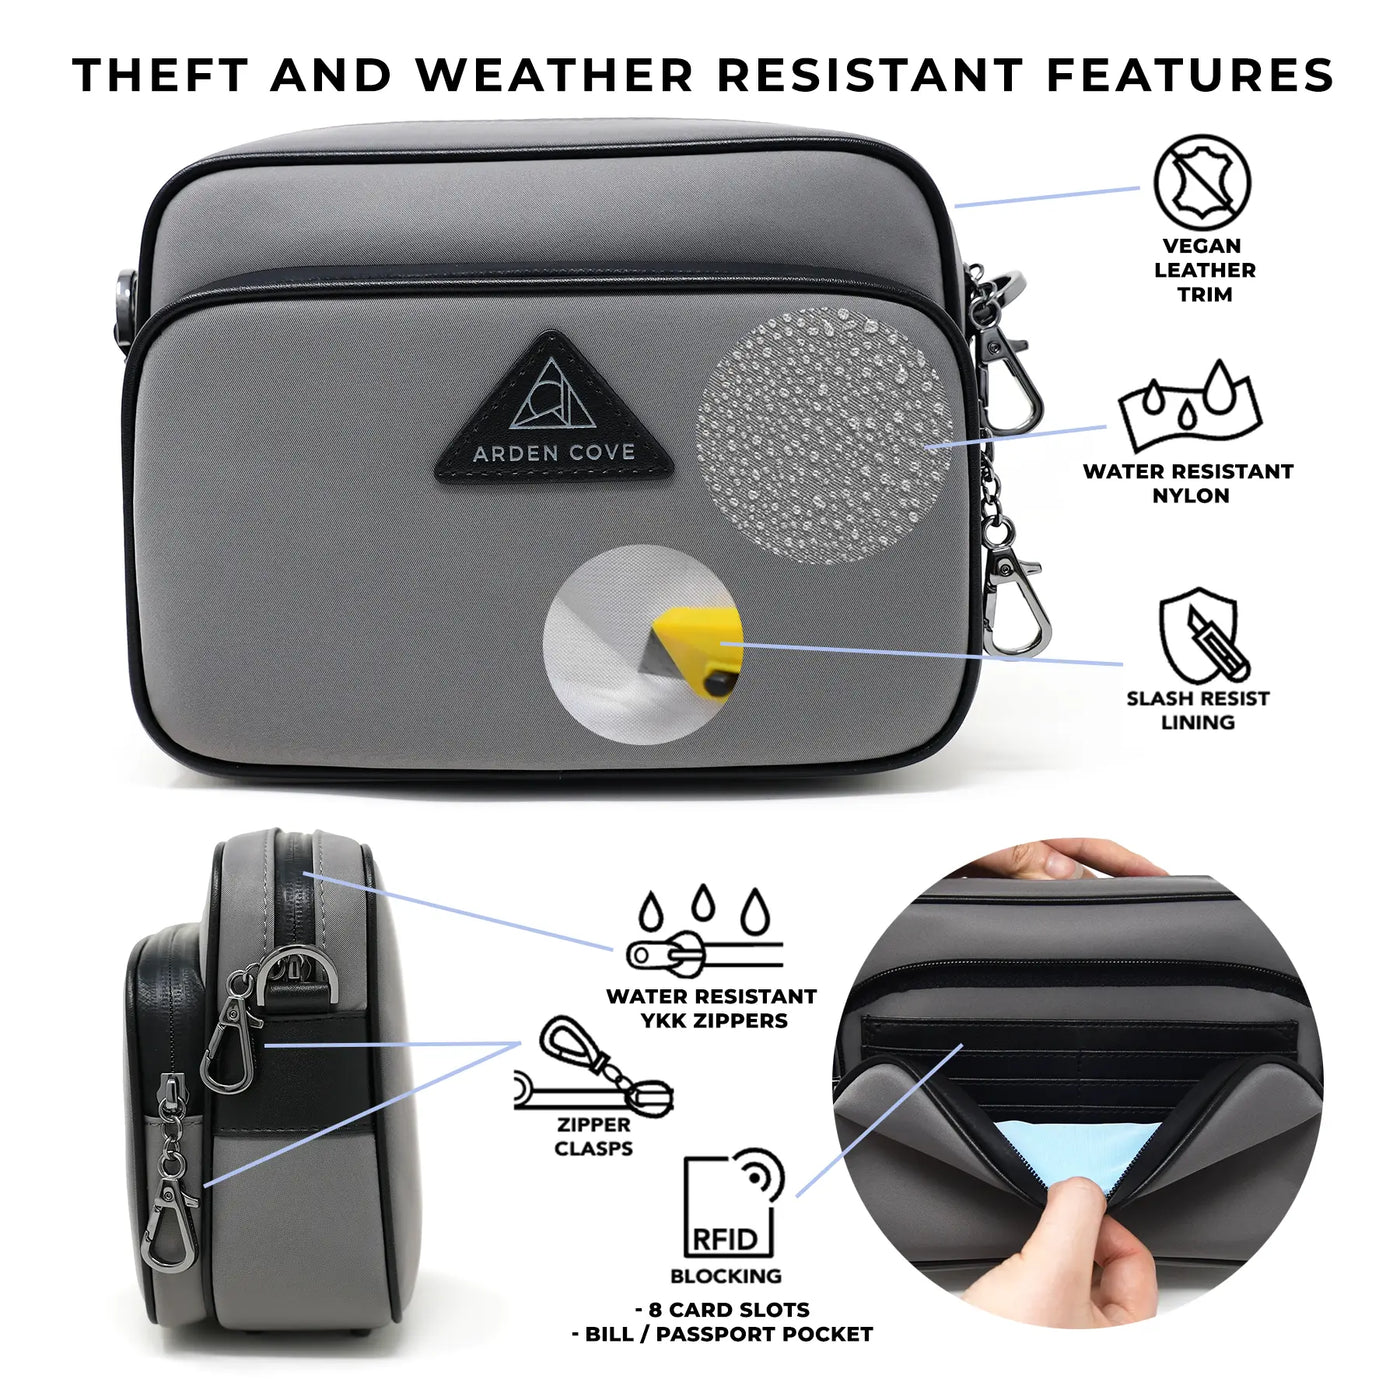 theft and weather resistant features of the Crissy Full Crossbody Locking Hardware